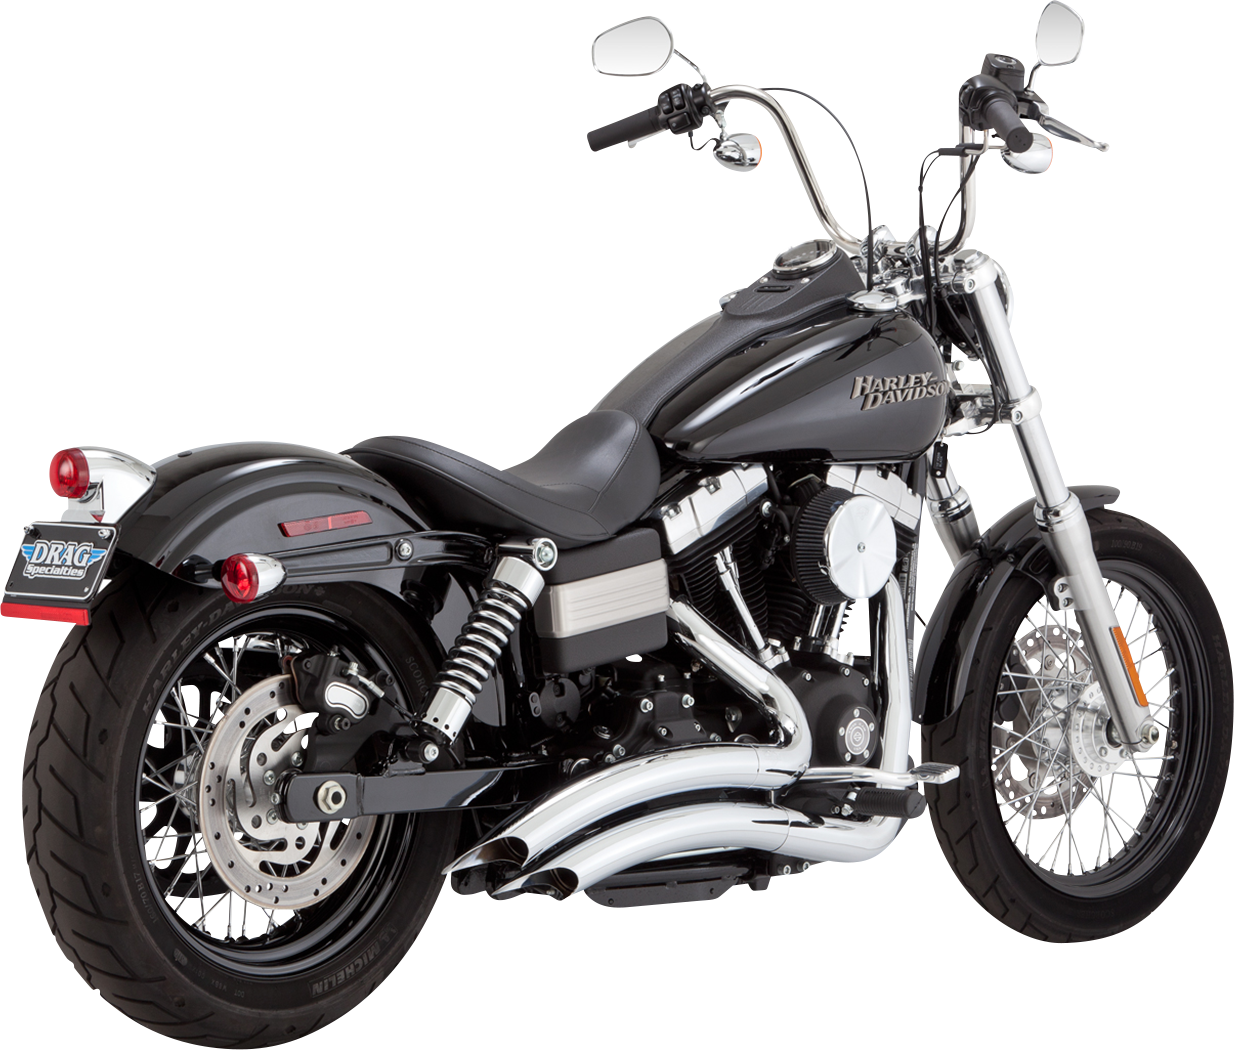 Vance & Hines 2-Into-2 Big Radius Exhaust System for 2006-2017 Harley Dyna FXD